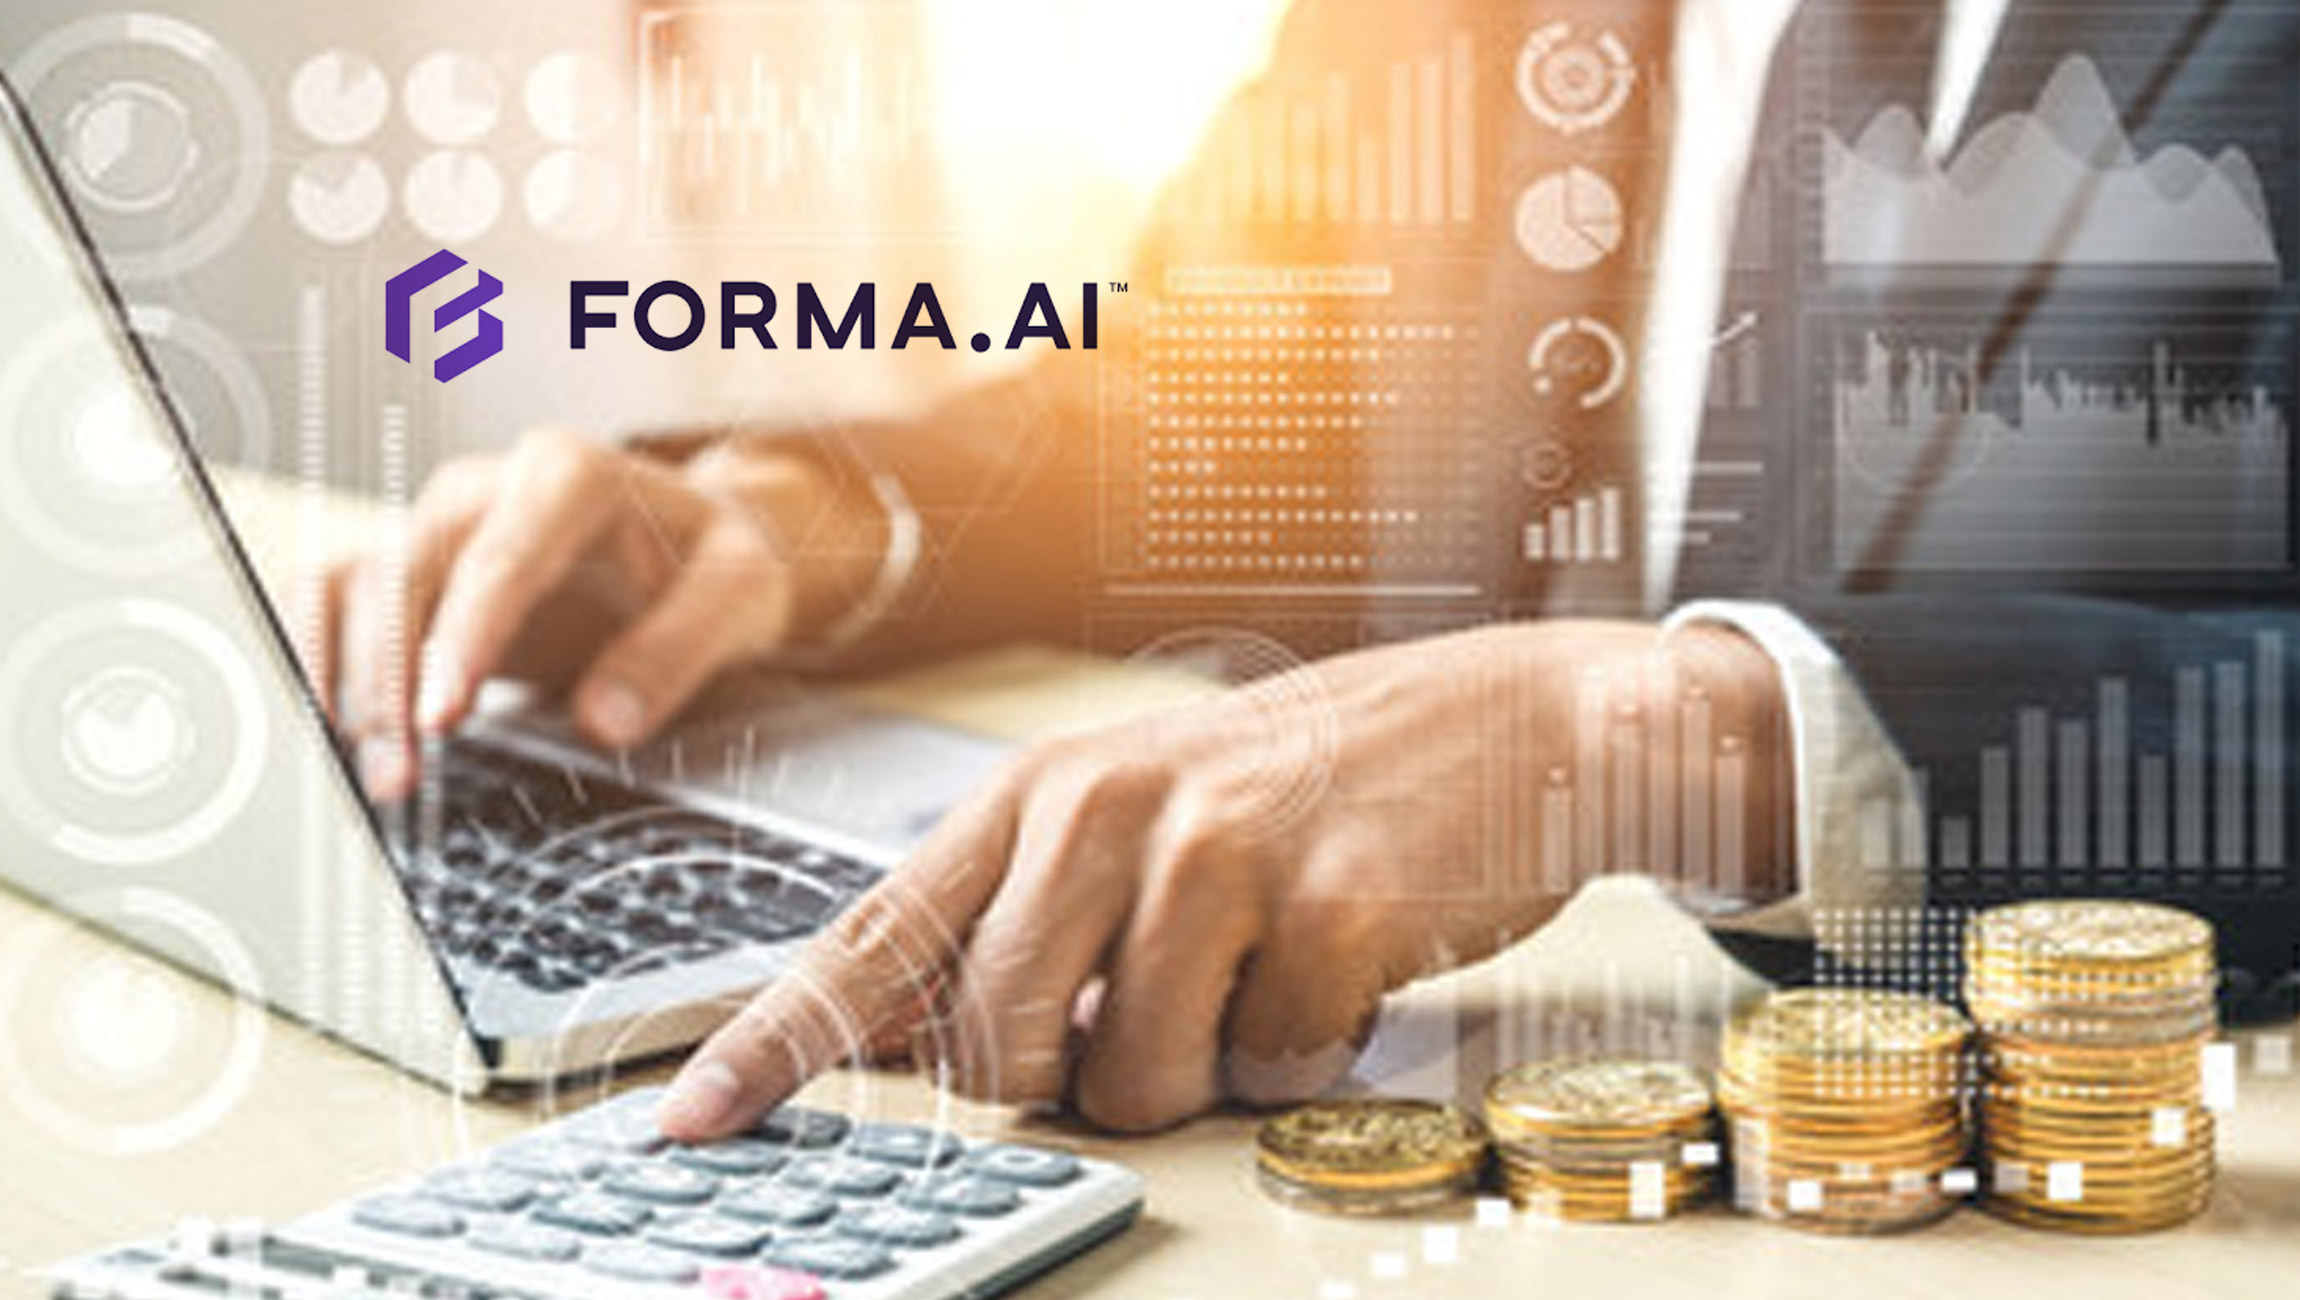 Forma.ai Closes USD$45 Million Series B Financing to Accelerate Revolutionary AI-Supported Sales Performance Management Platform